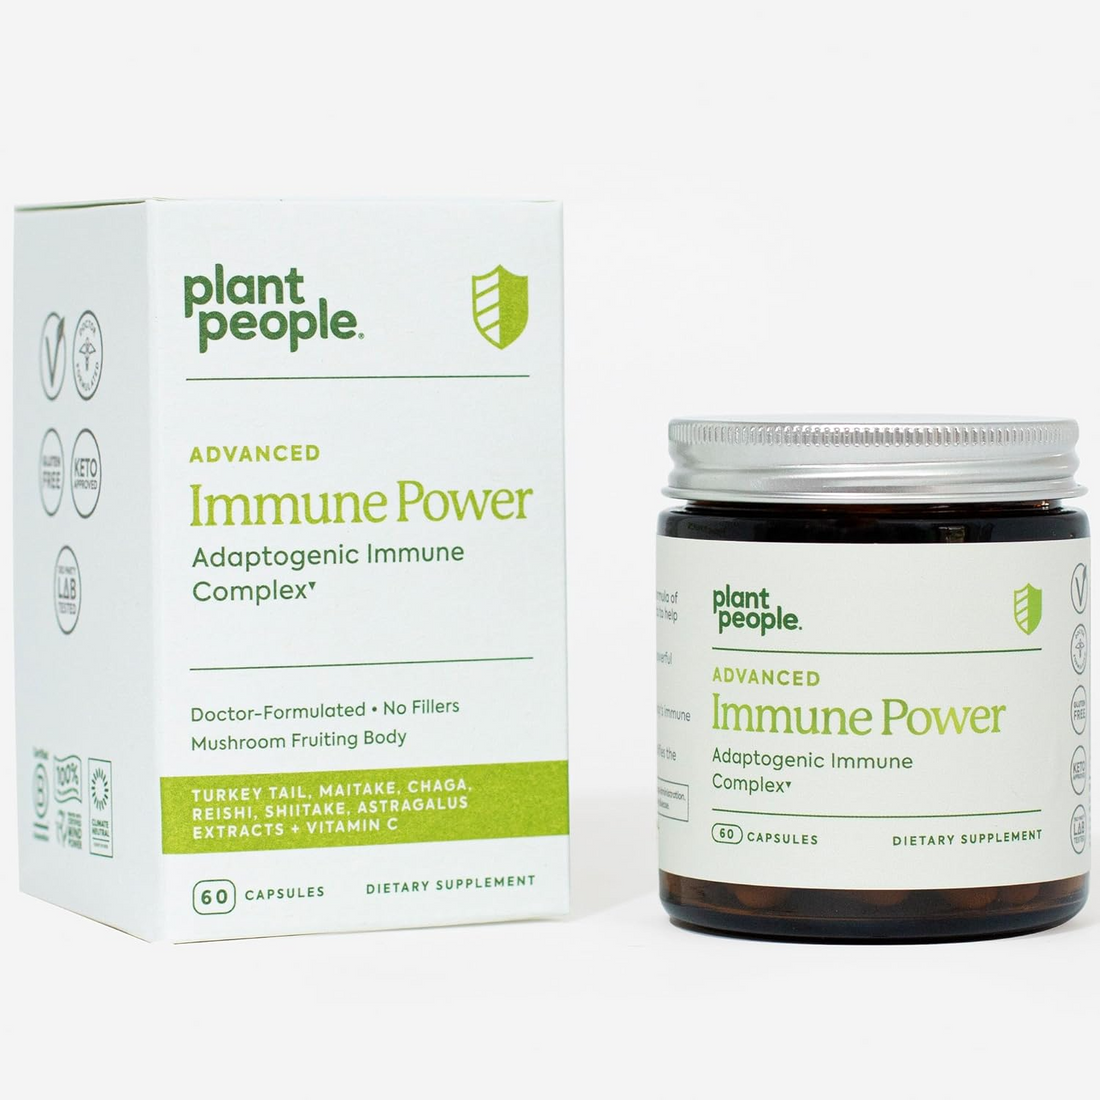 Plant People - Immune Power | Advanced Immune Support